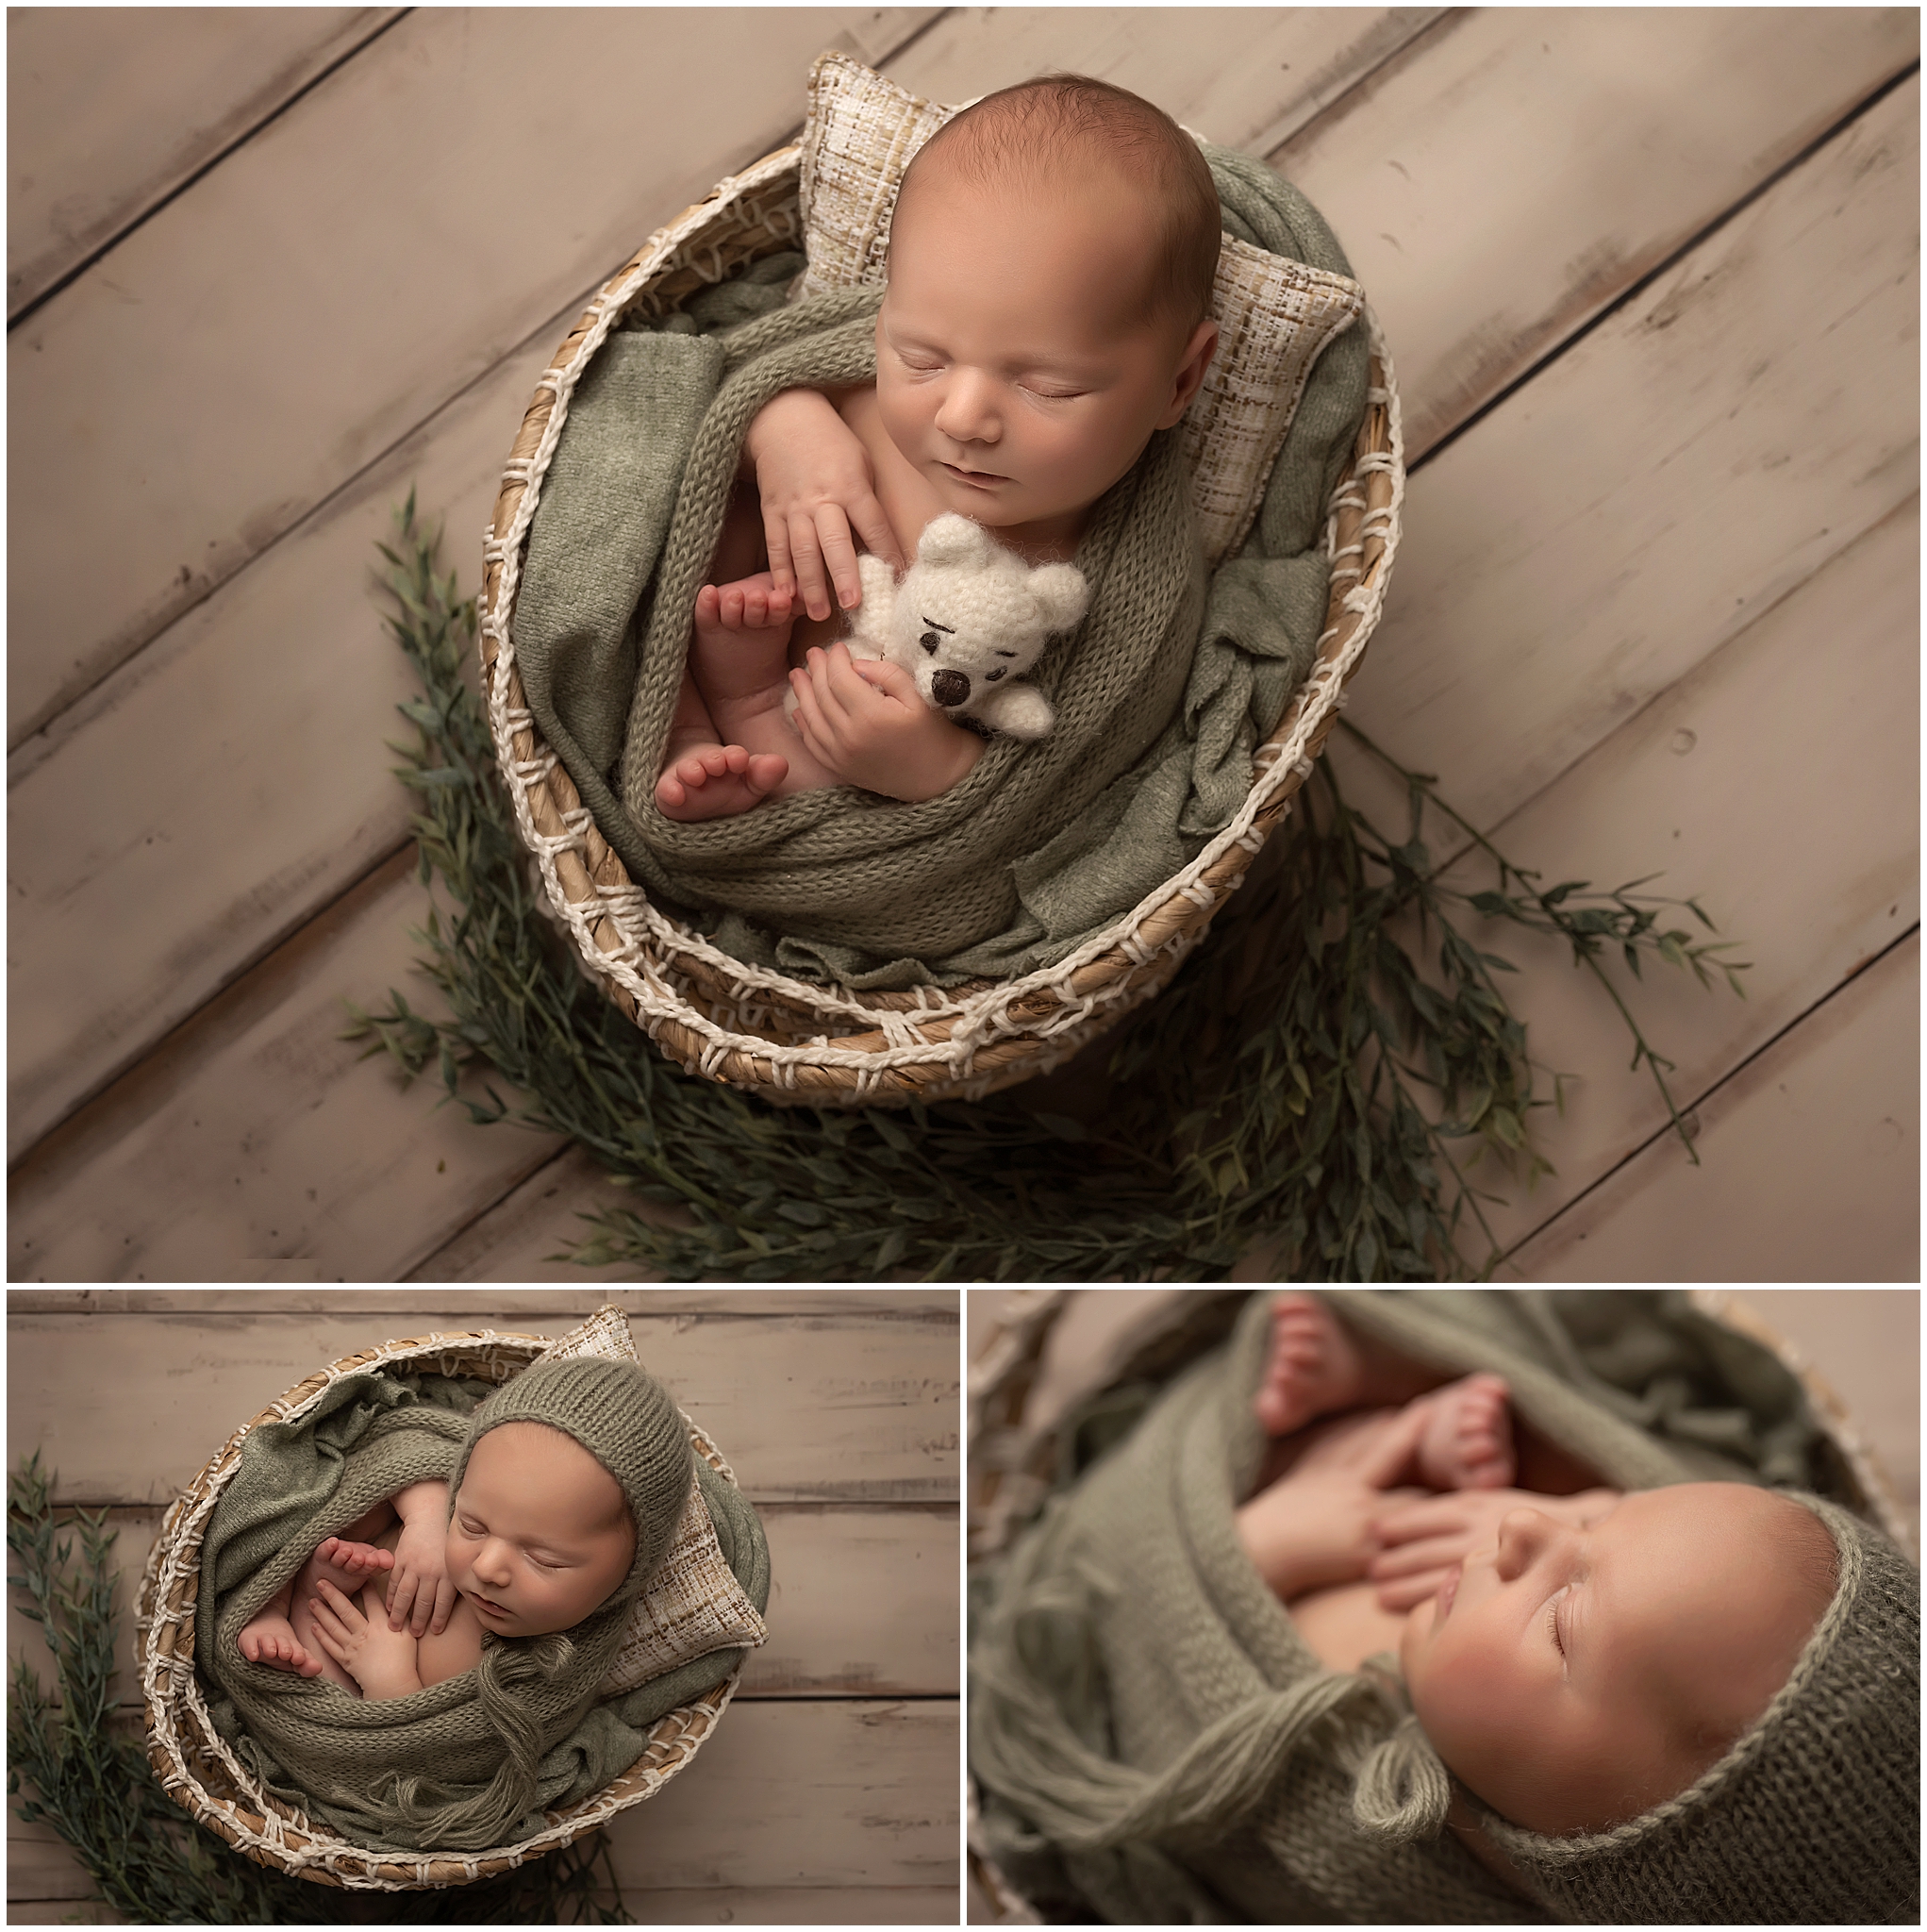 baby holding teddy bear during newborn session at photography session in london ontario